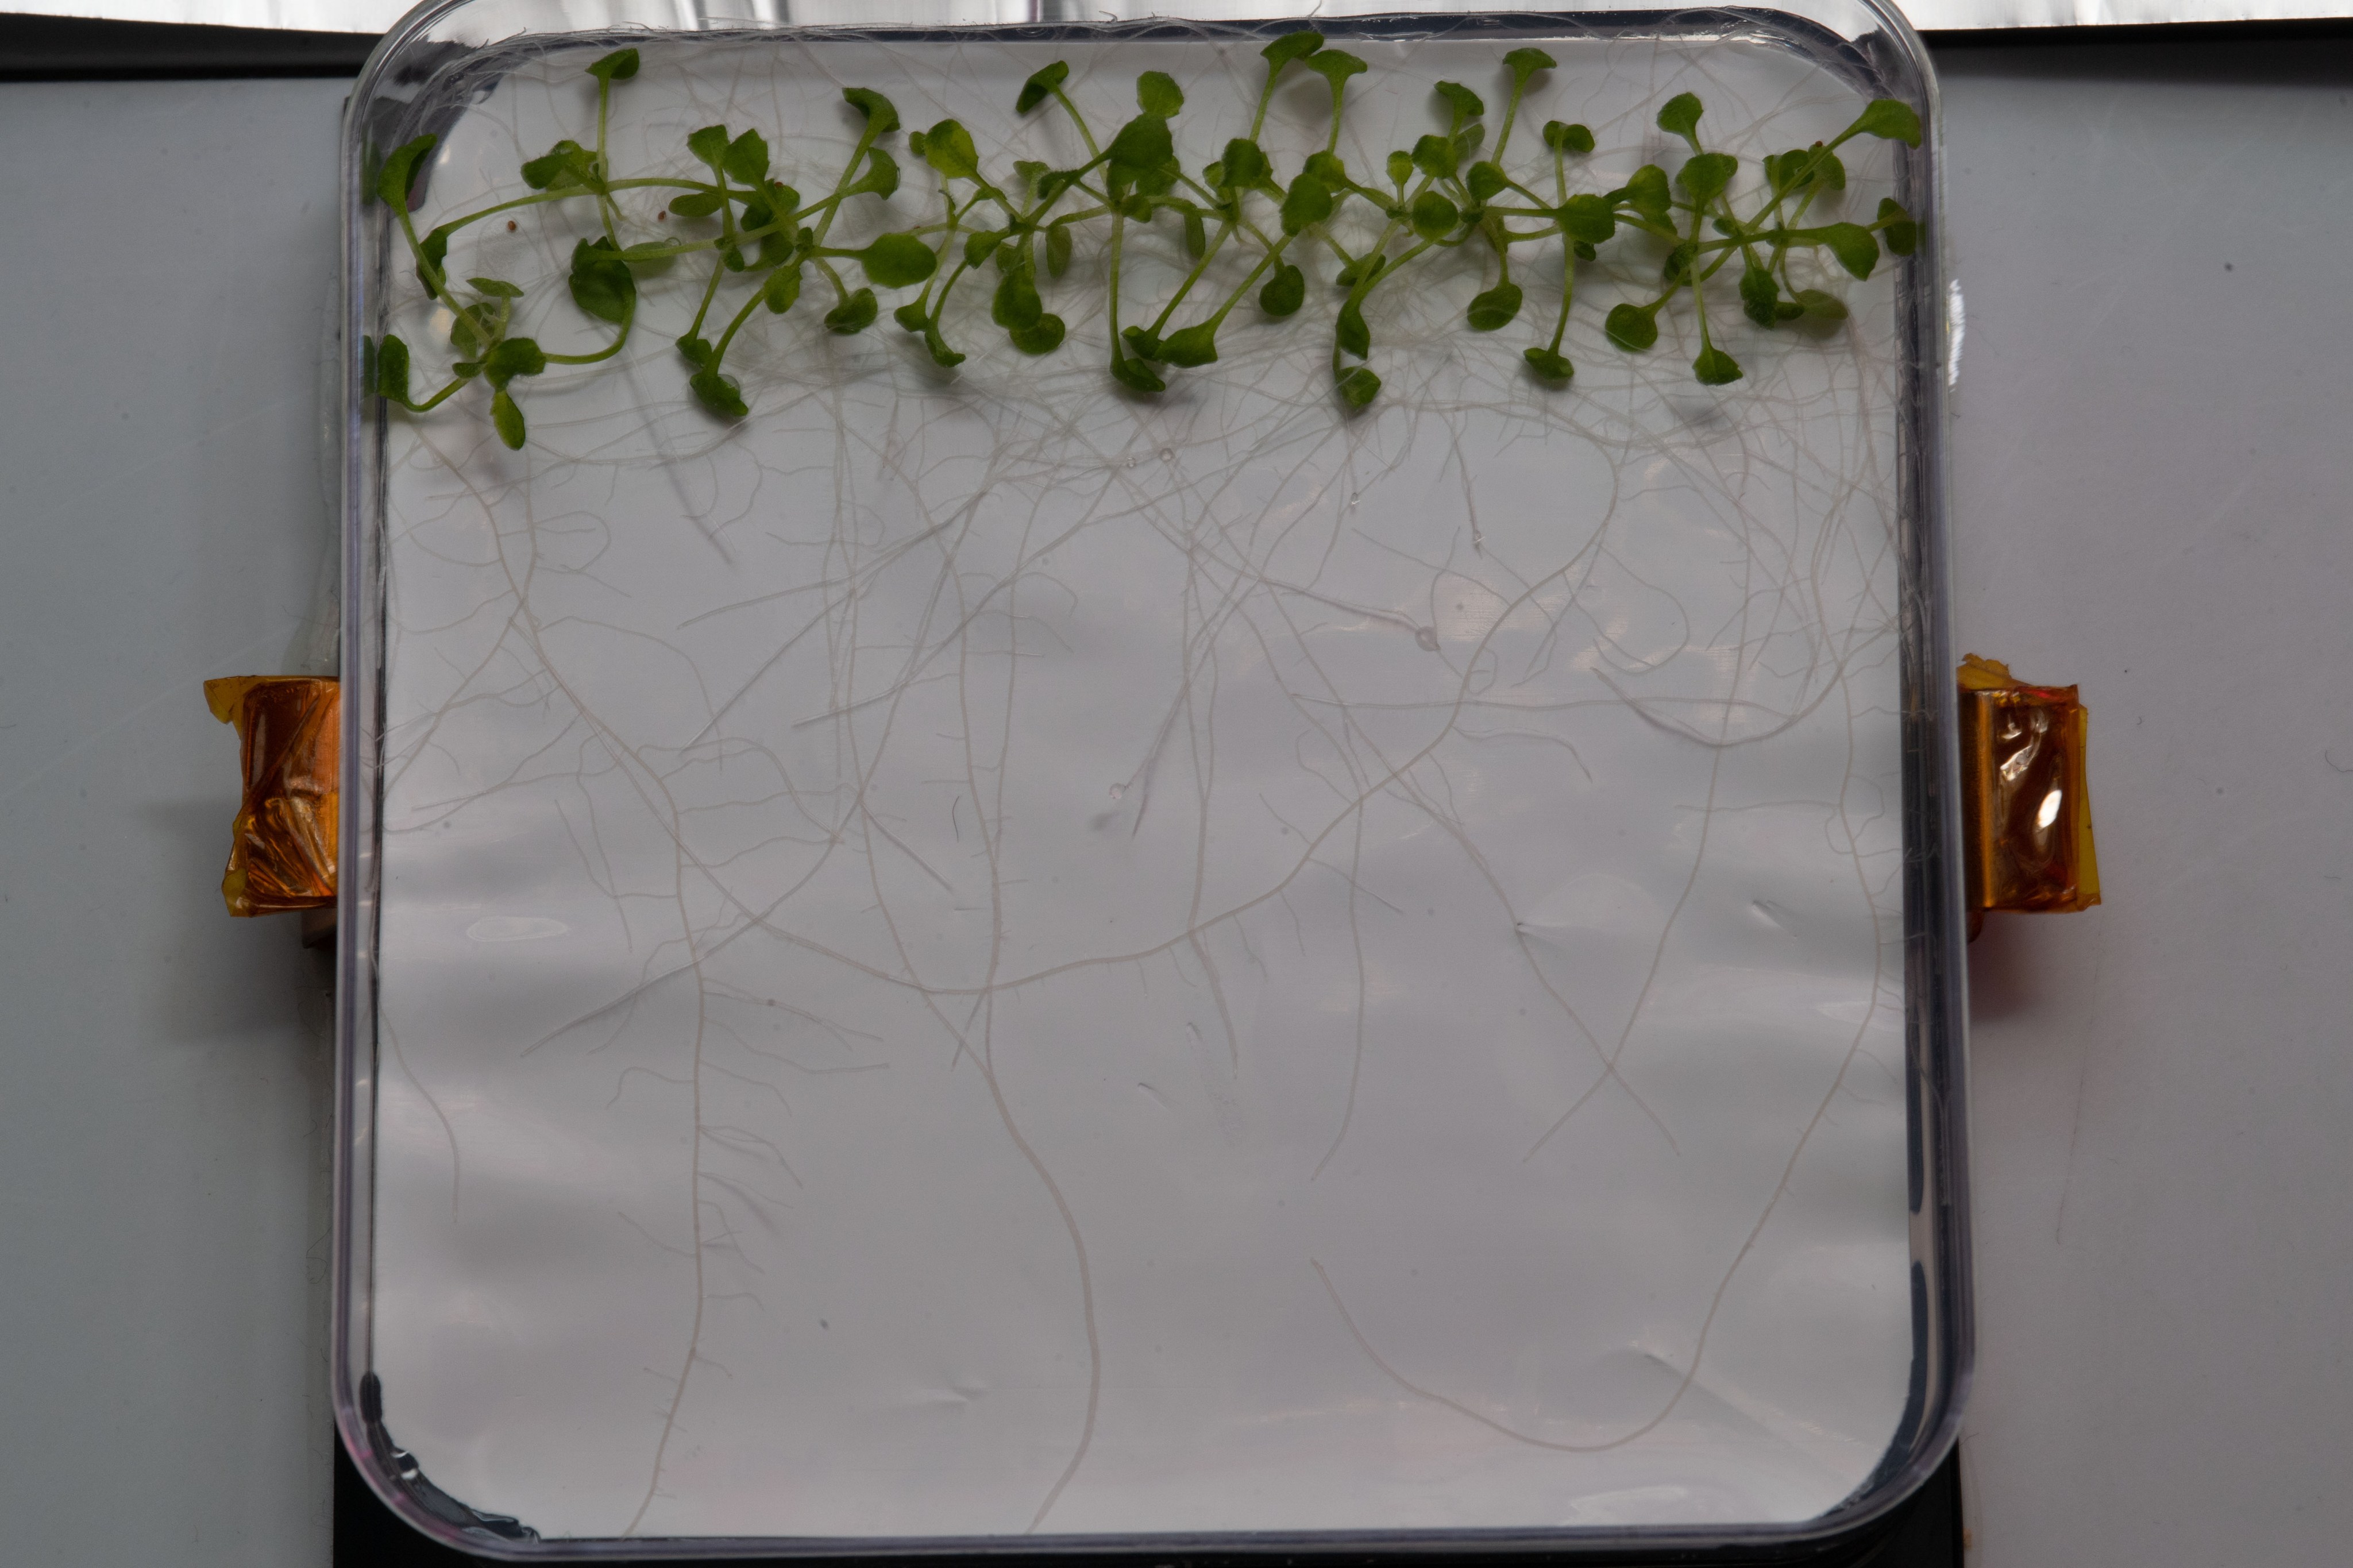 Small, green, sprouted Arabidopsis thaliana seedlings lay next to each other inside a clear, plastic box. The white roots have grown into what looks like a spider’s web below the leaves.